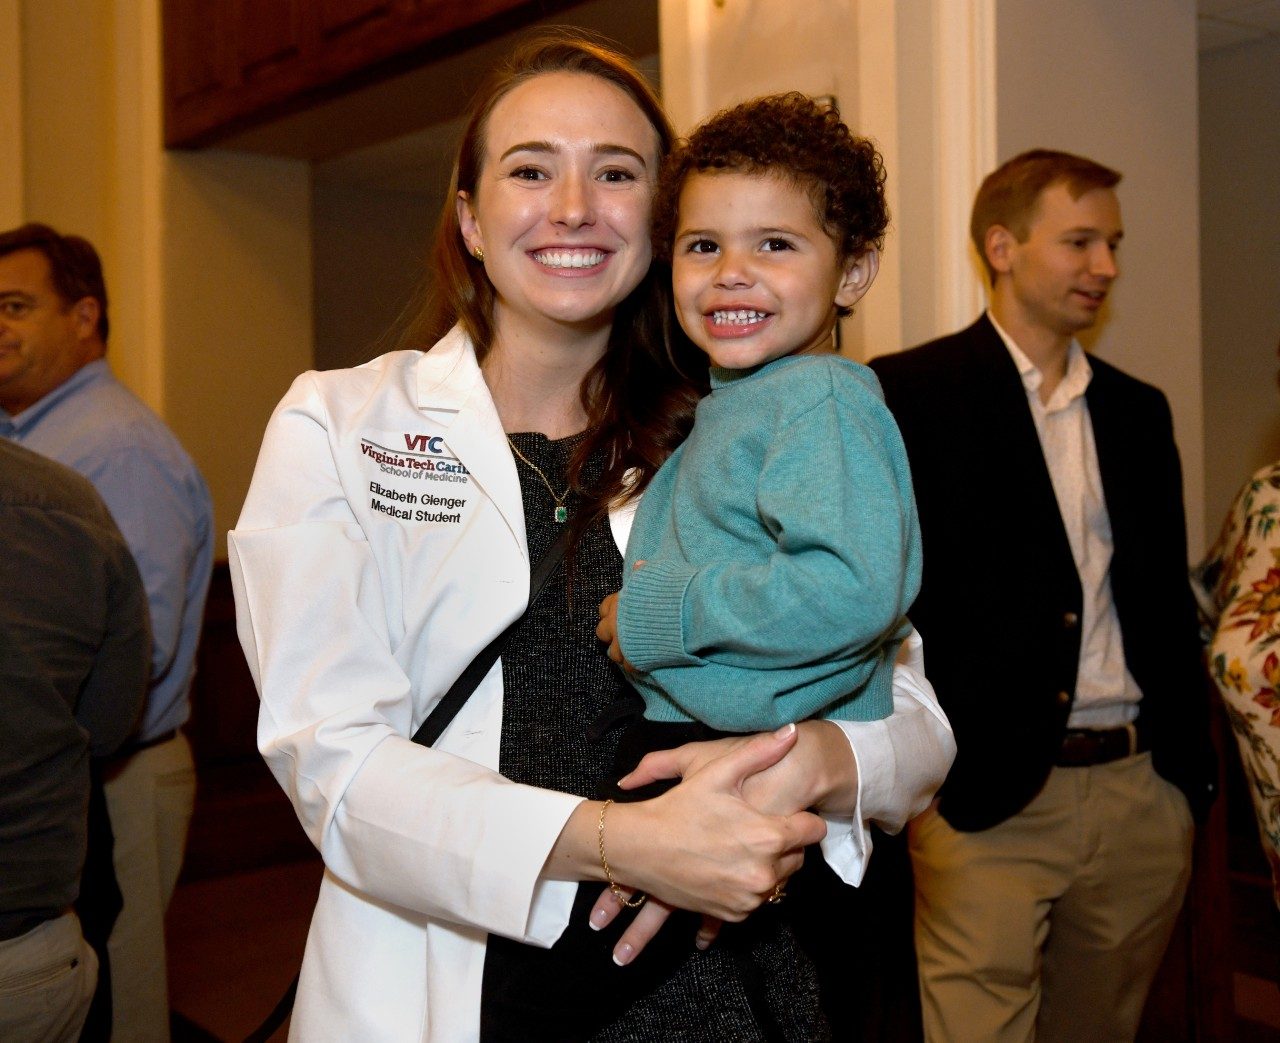 Liz Gienger wears her new white coat while holding her son, Elijah, at the VTCSOM White Coat Ceremony reception. Photos by Natalee Waters for Virginia Tech.